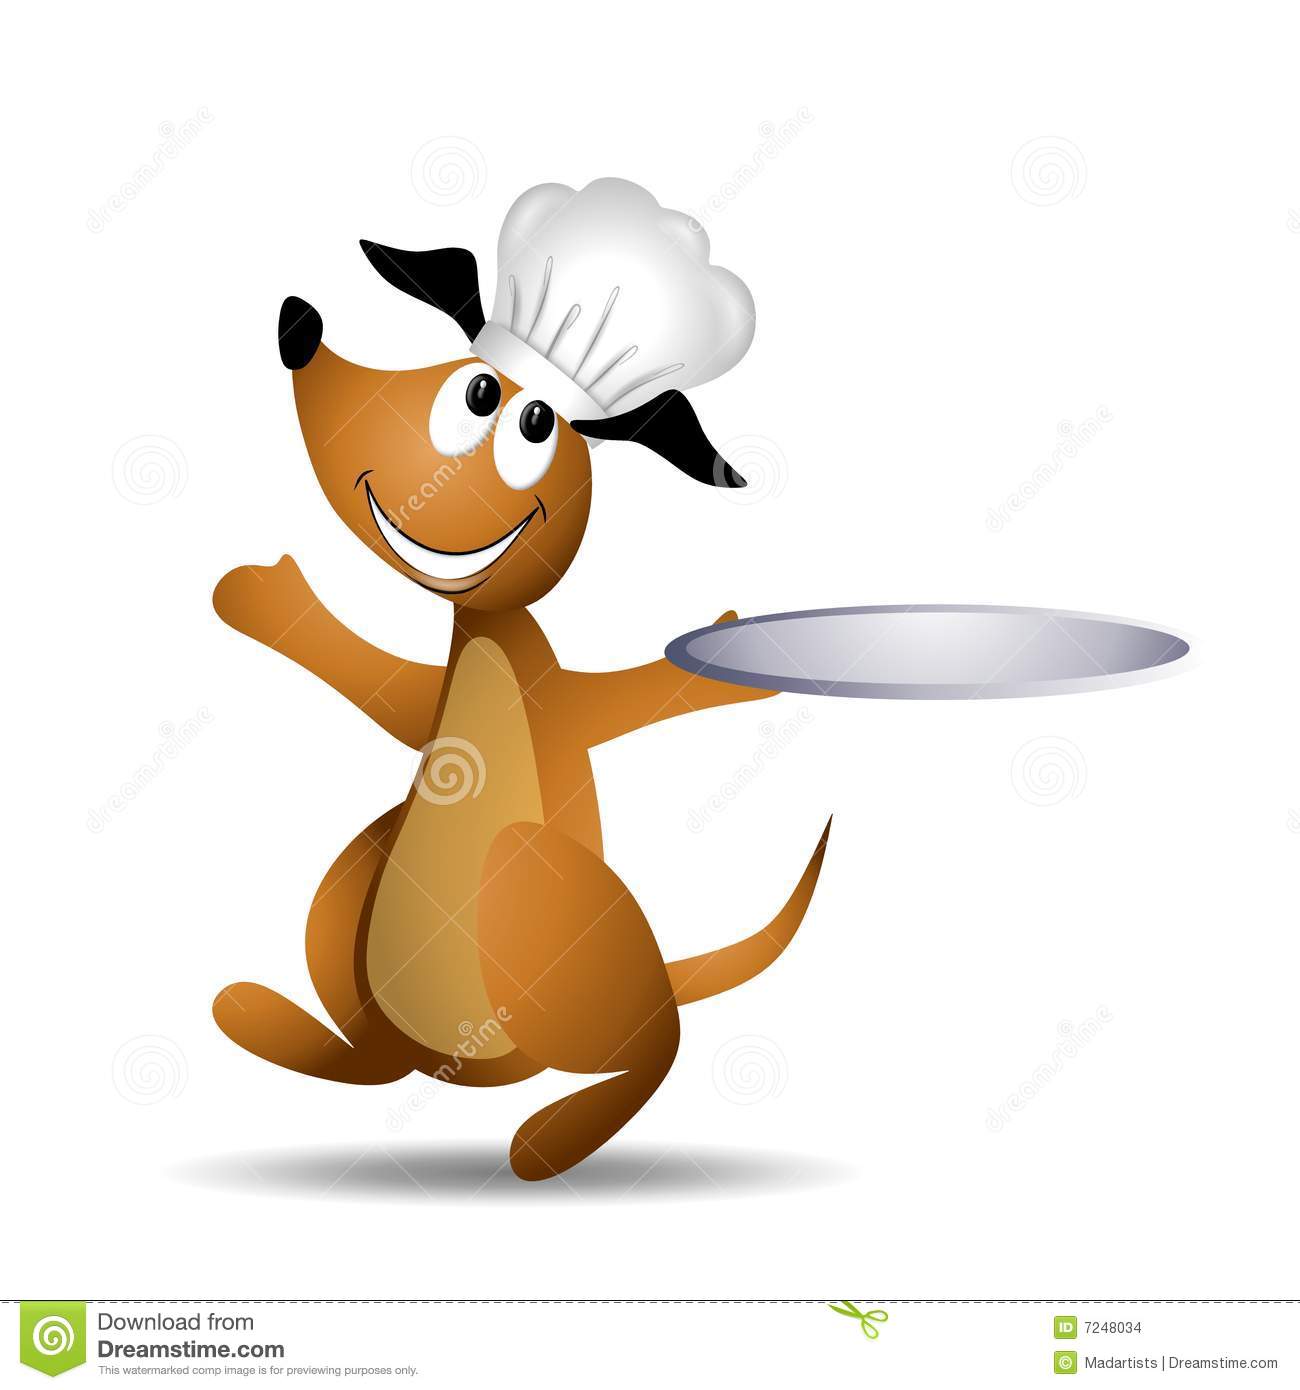 Smiling Dog Wearing A Chef Hat And Holding A Serving Tray Or Platter